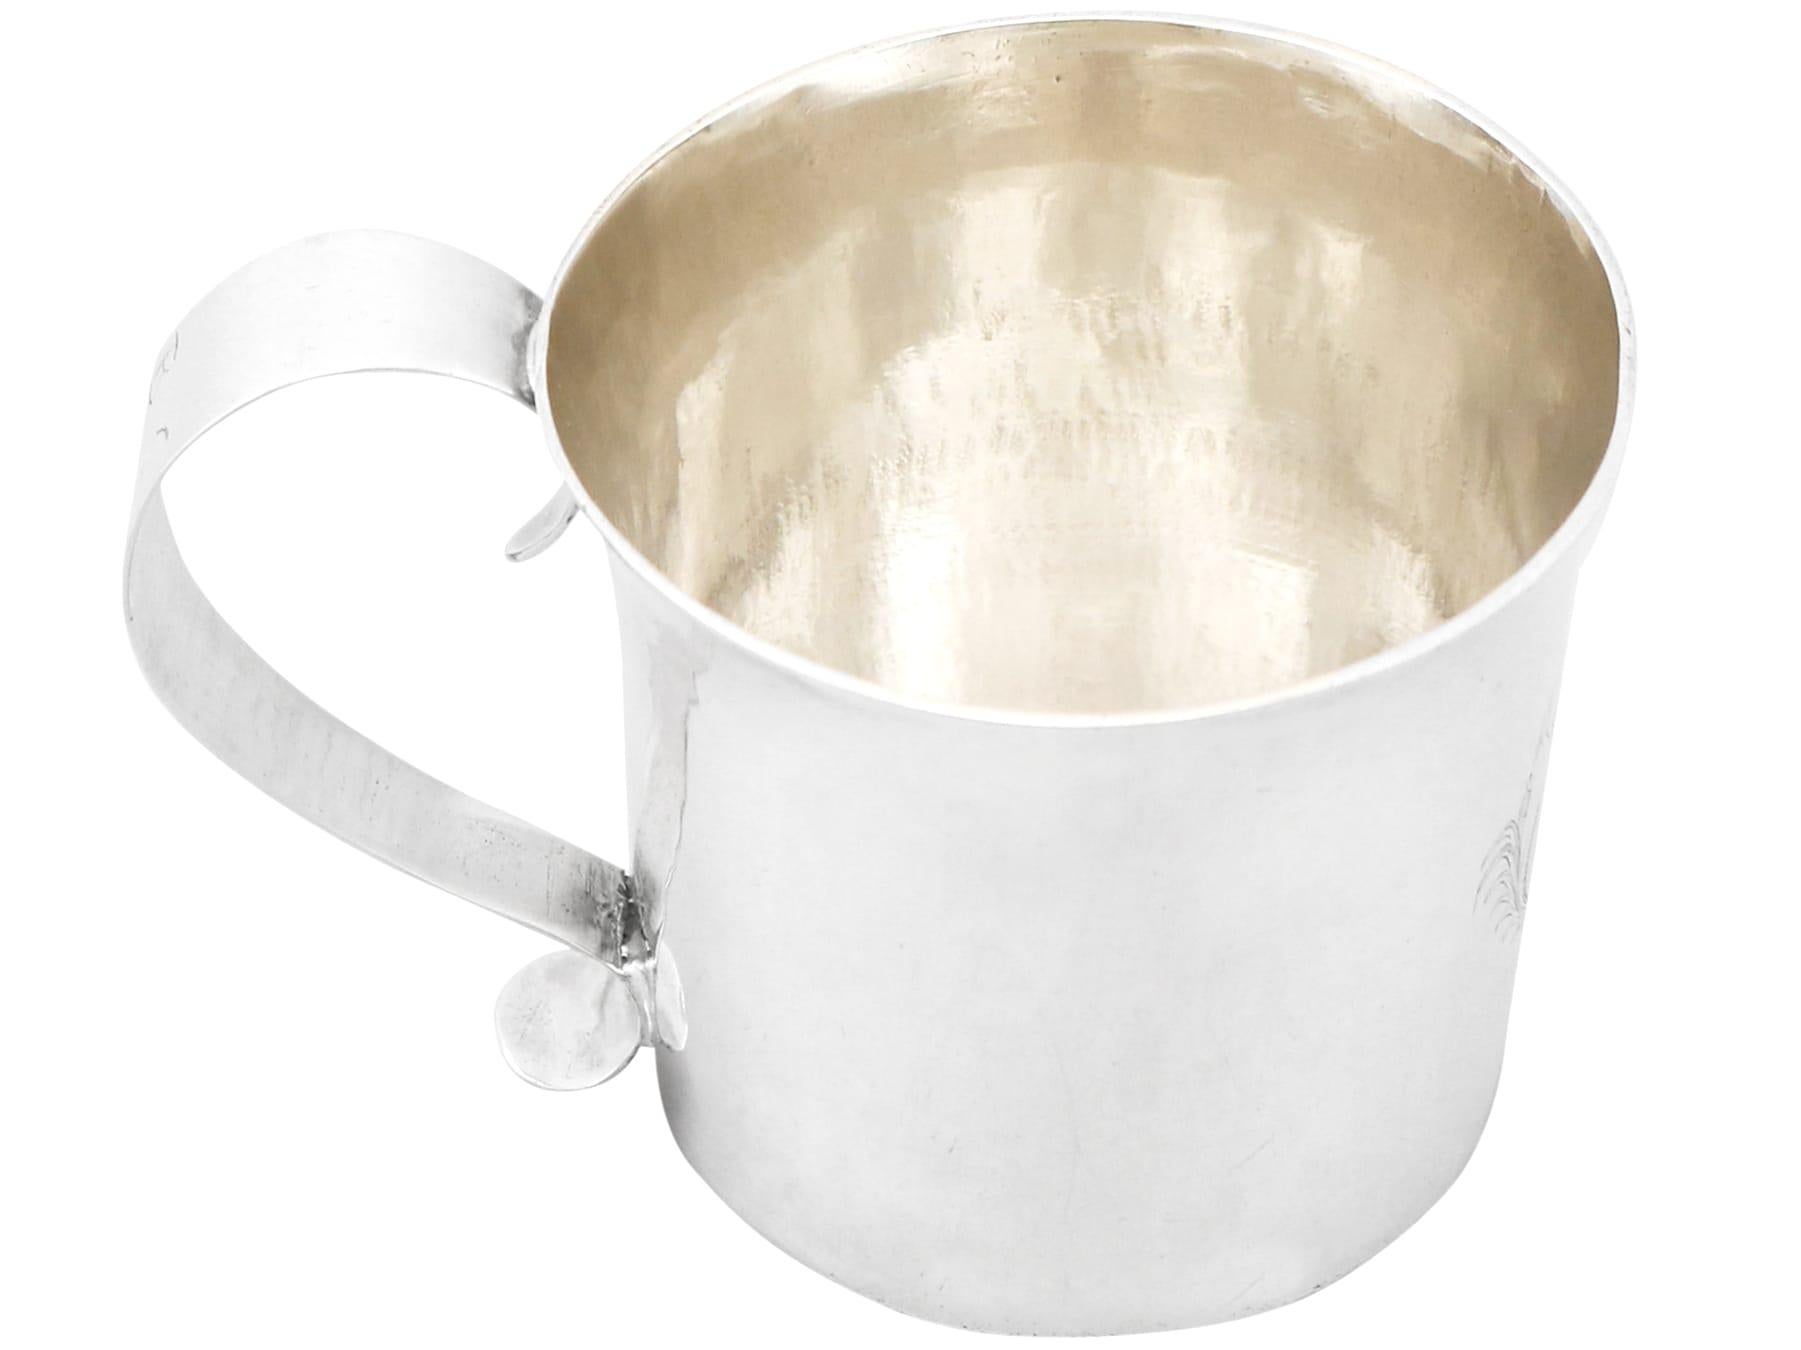 An exceptional, fine and impressive antique Charles II sterling silver child's mug, an addition to our silverware collection.

This exceptional antique Charles II sterling silver mug has a cylindrical tapering form with a flared rim.

The